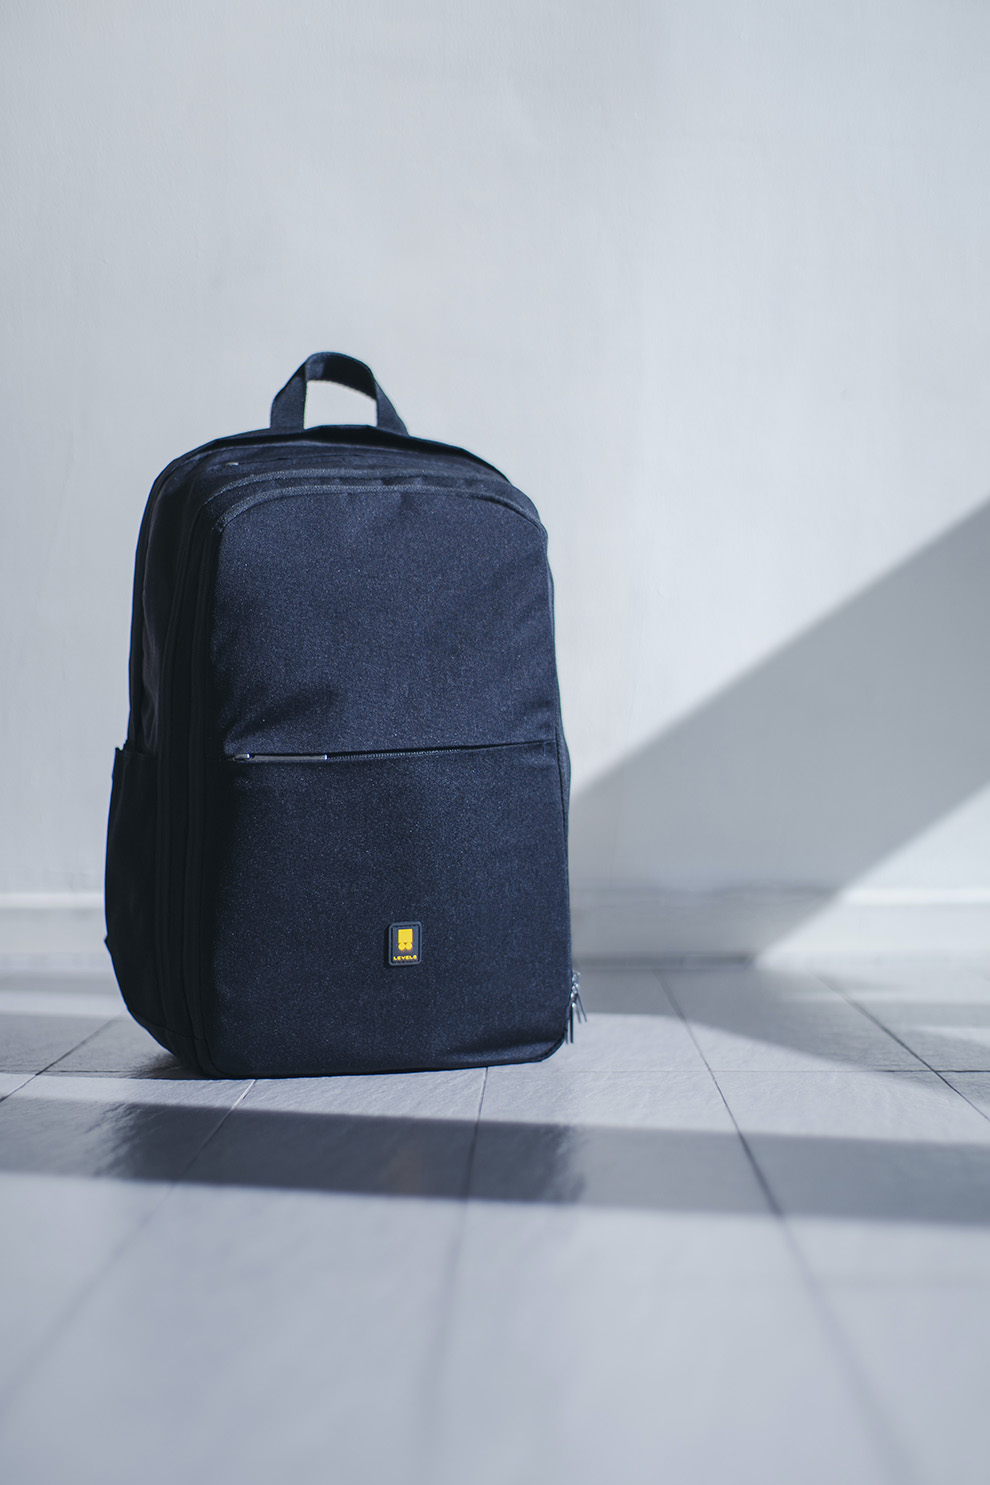 The Best Travel Bags For Men - Forbes Vetted